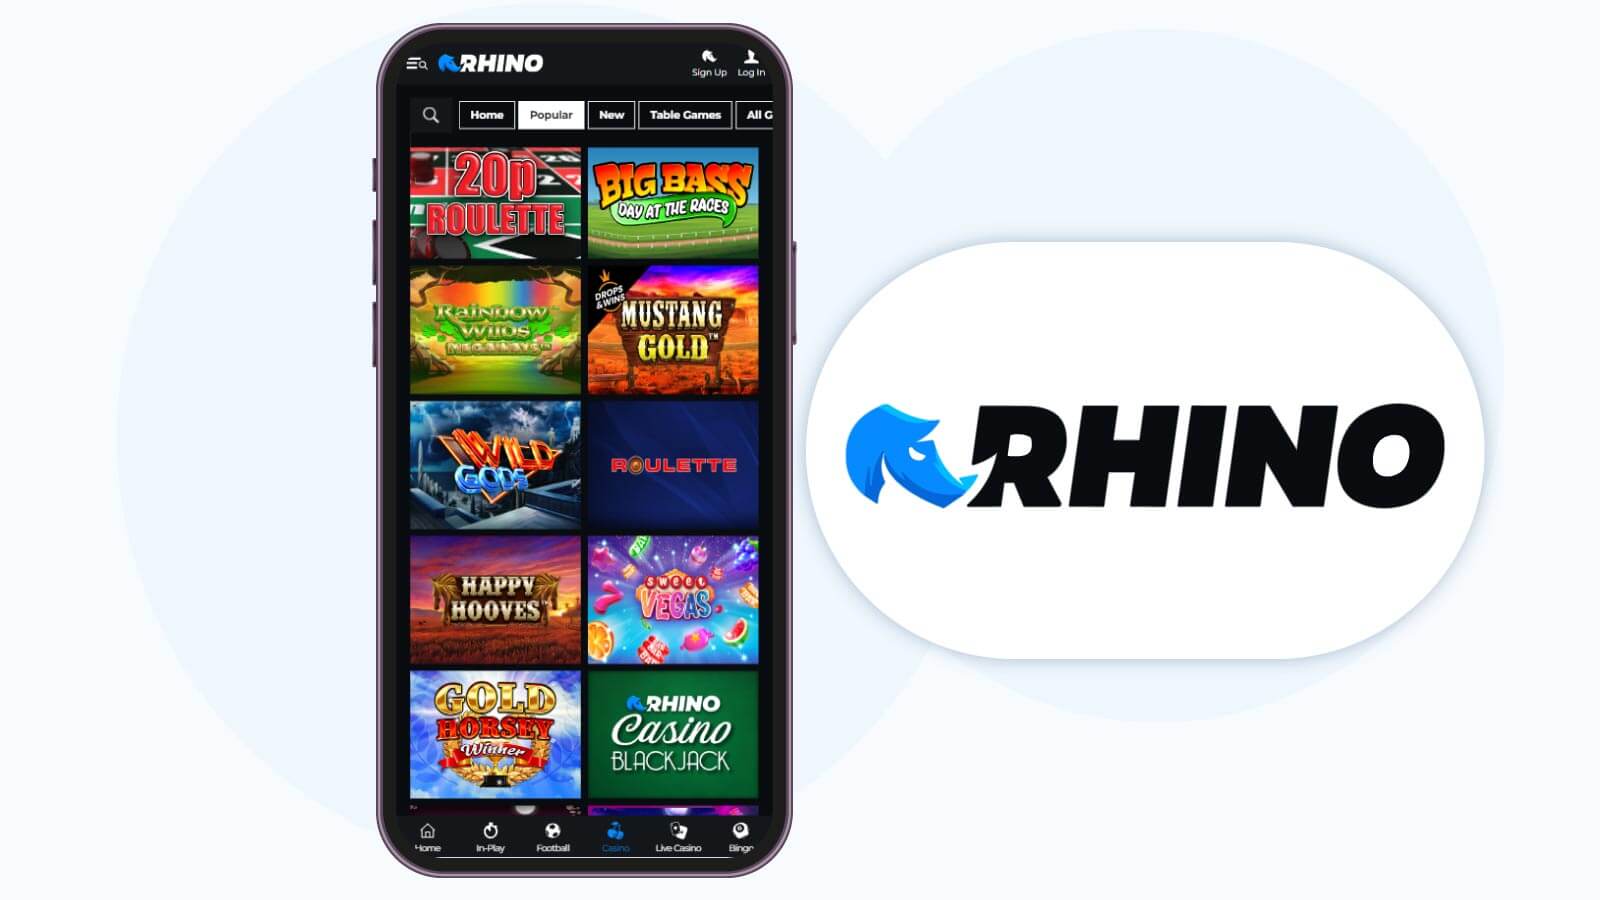 Rhino.bet – Best Casino App for iPhone for Live Dealer Games